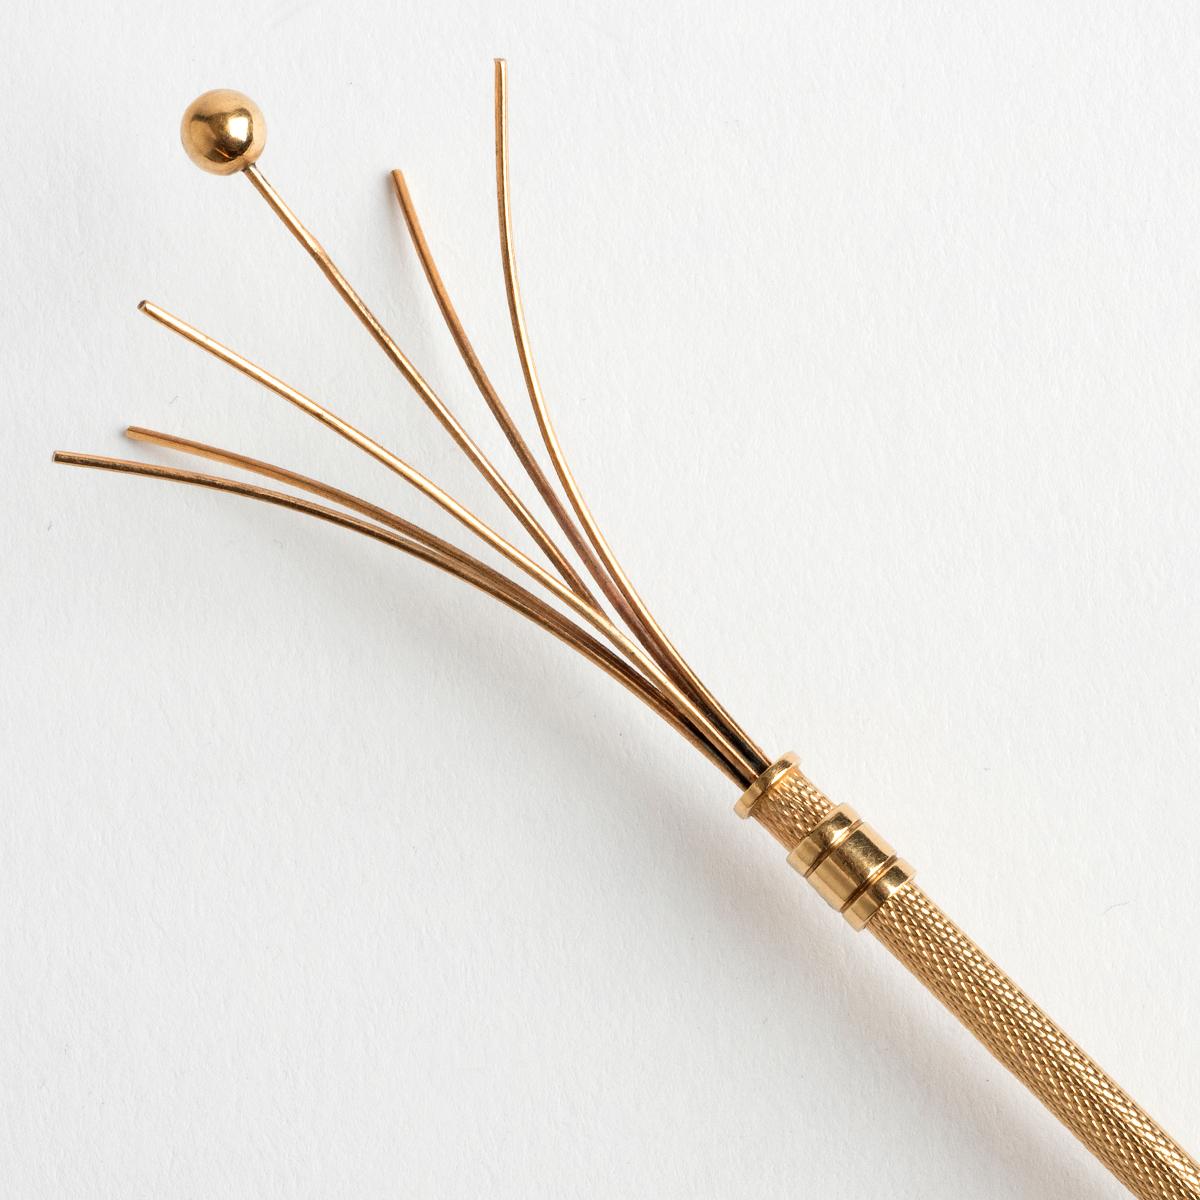 A unique piece within our carefully curated Vintage & Prestige fine jewellery collection, we are delighted to present the following:

Popular in the roaring '20s and 1930s, a champagne swizzle stick was used to remove and reduce bubbles in a glass